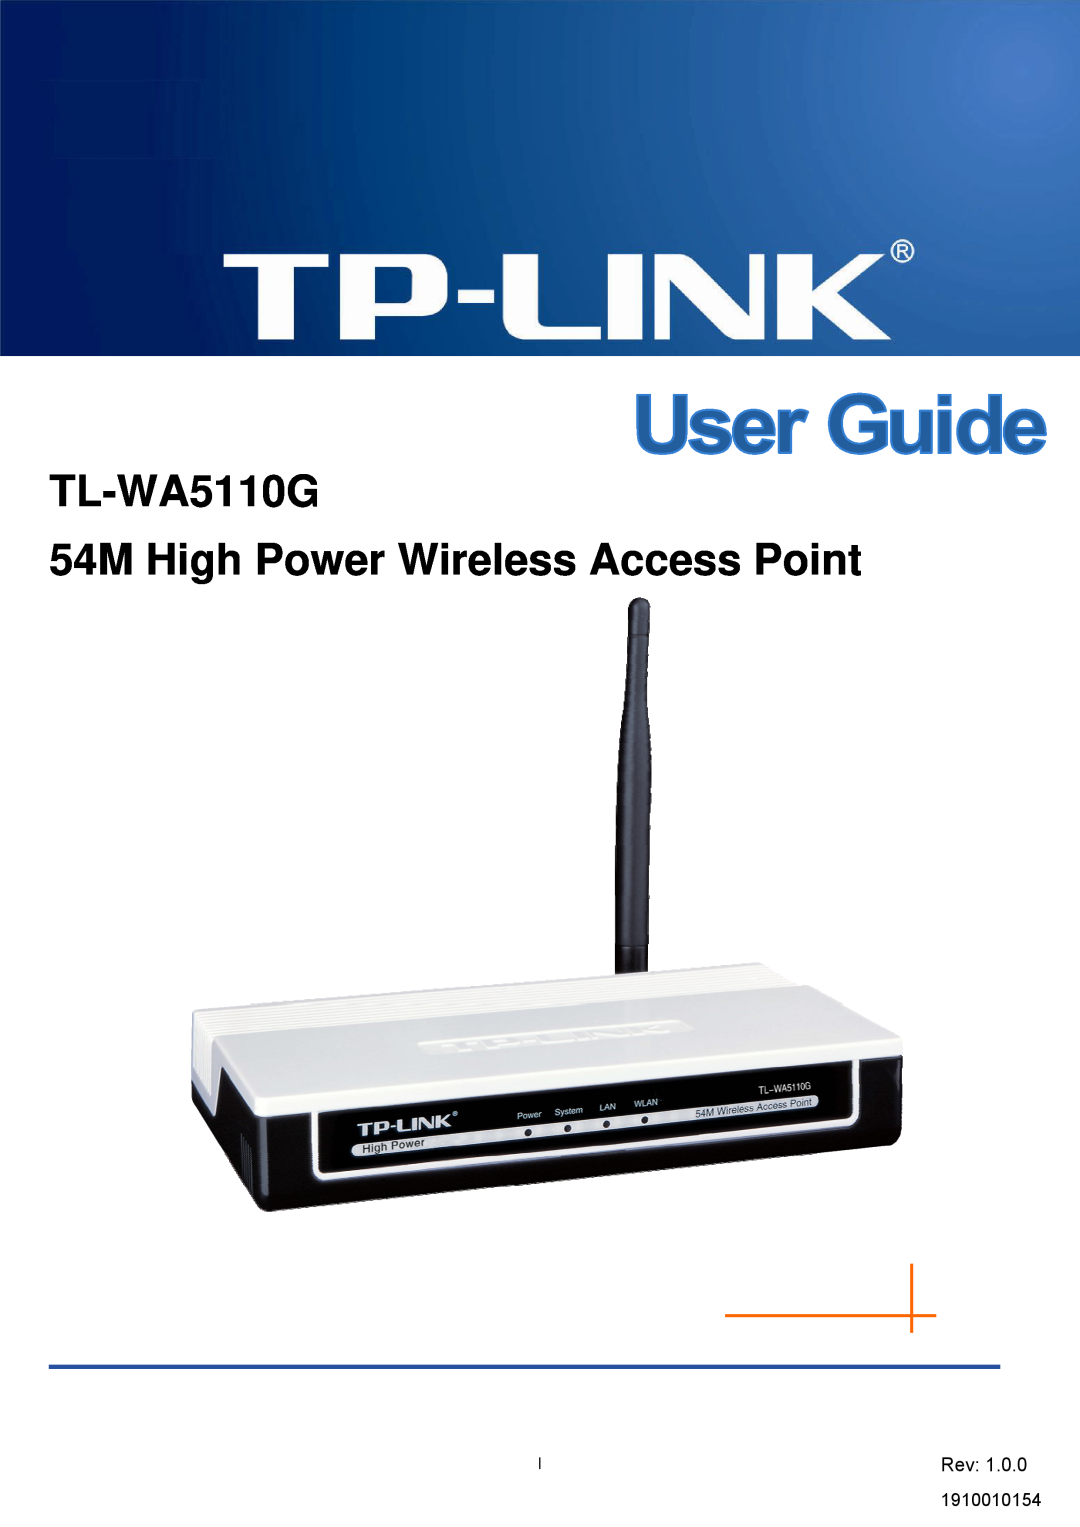 TP-Link manual TL-WA5110G 54M High Power Wireless Access Point, 1910010154 